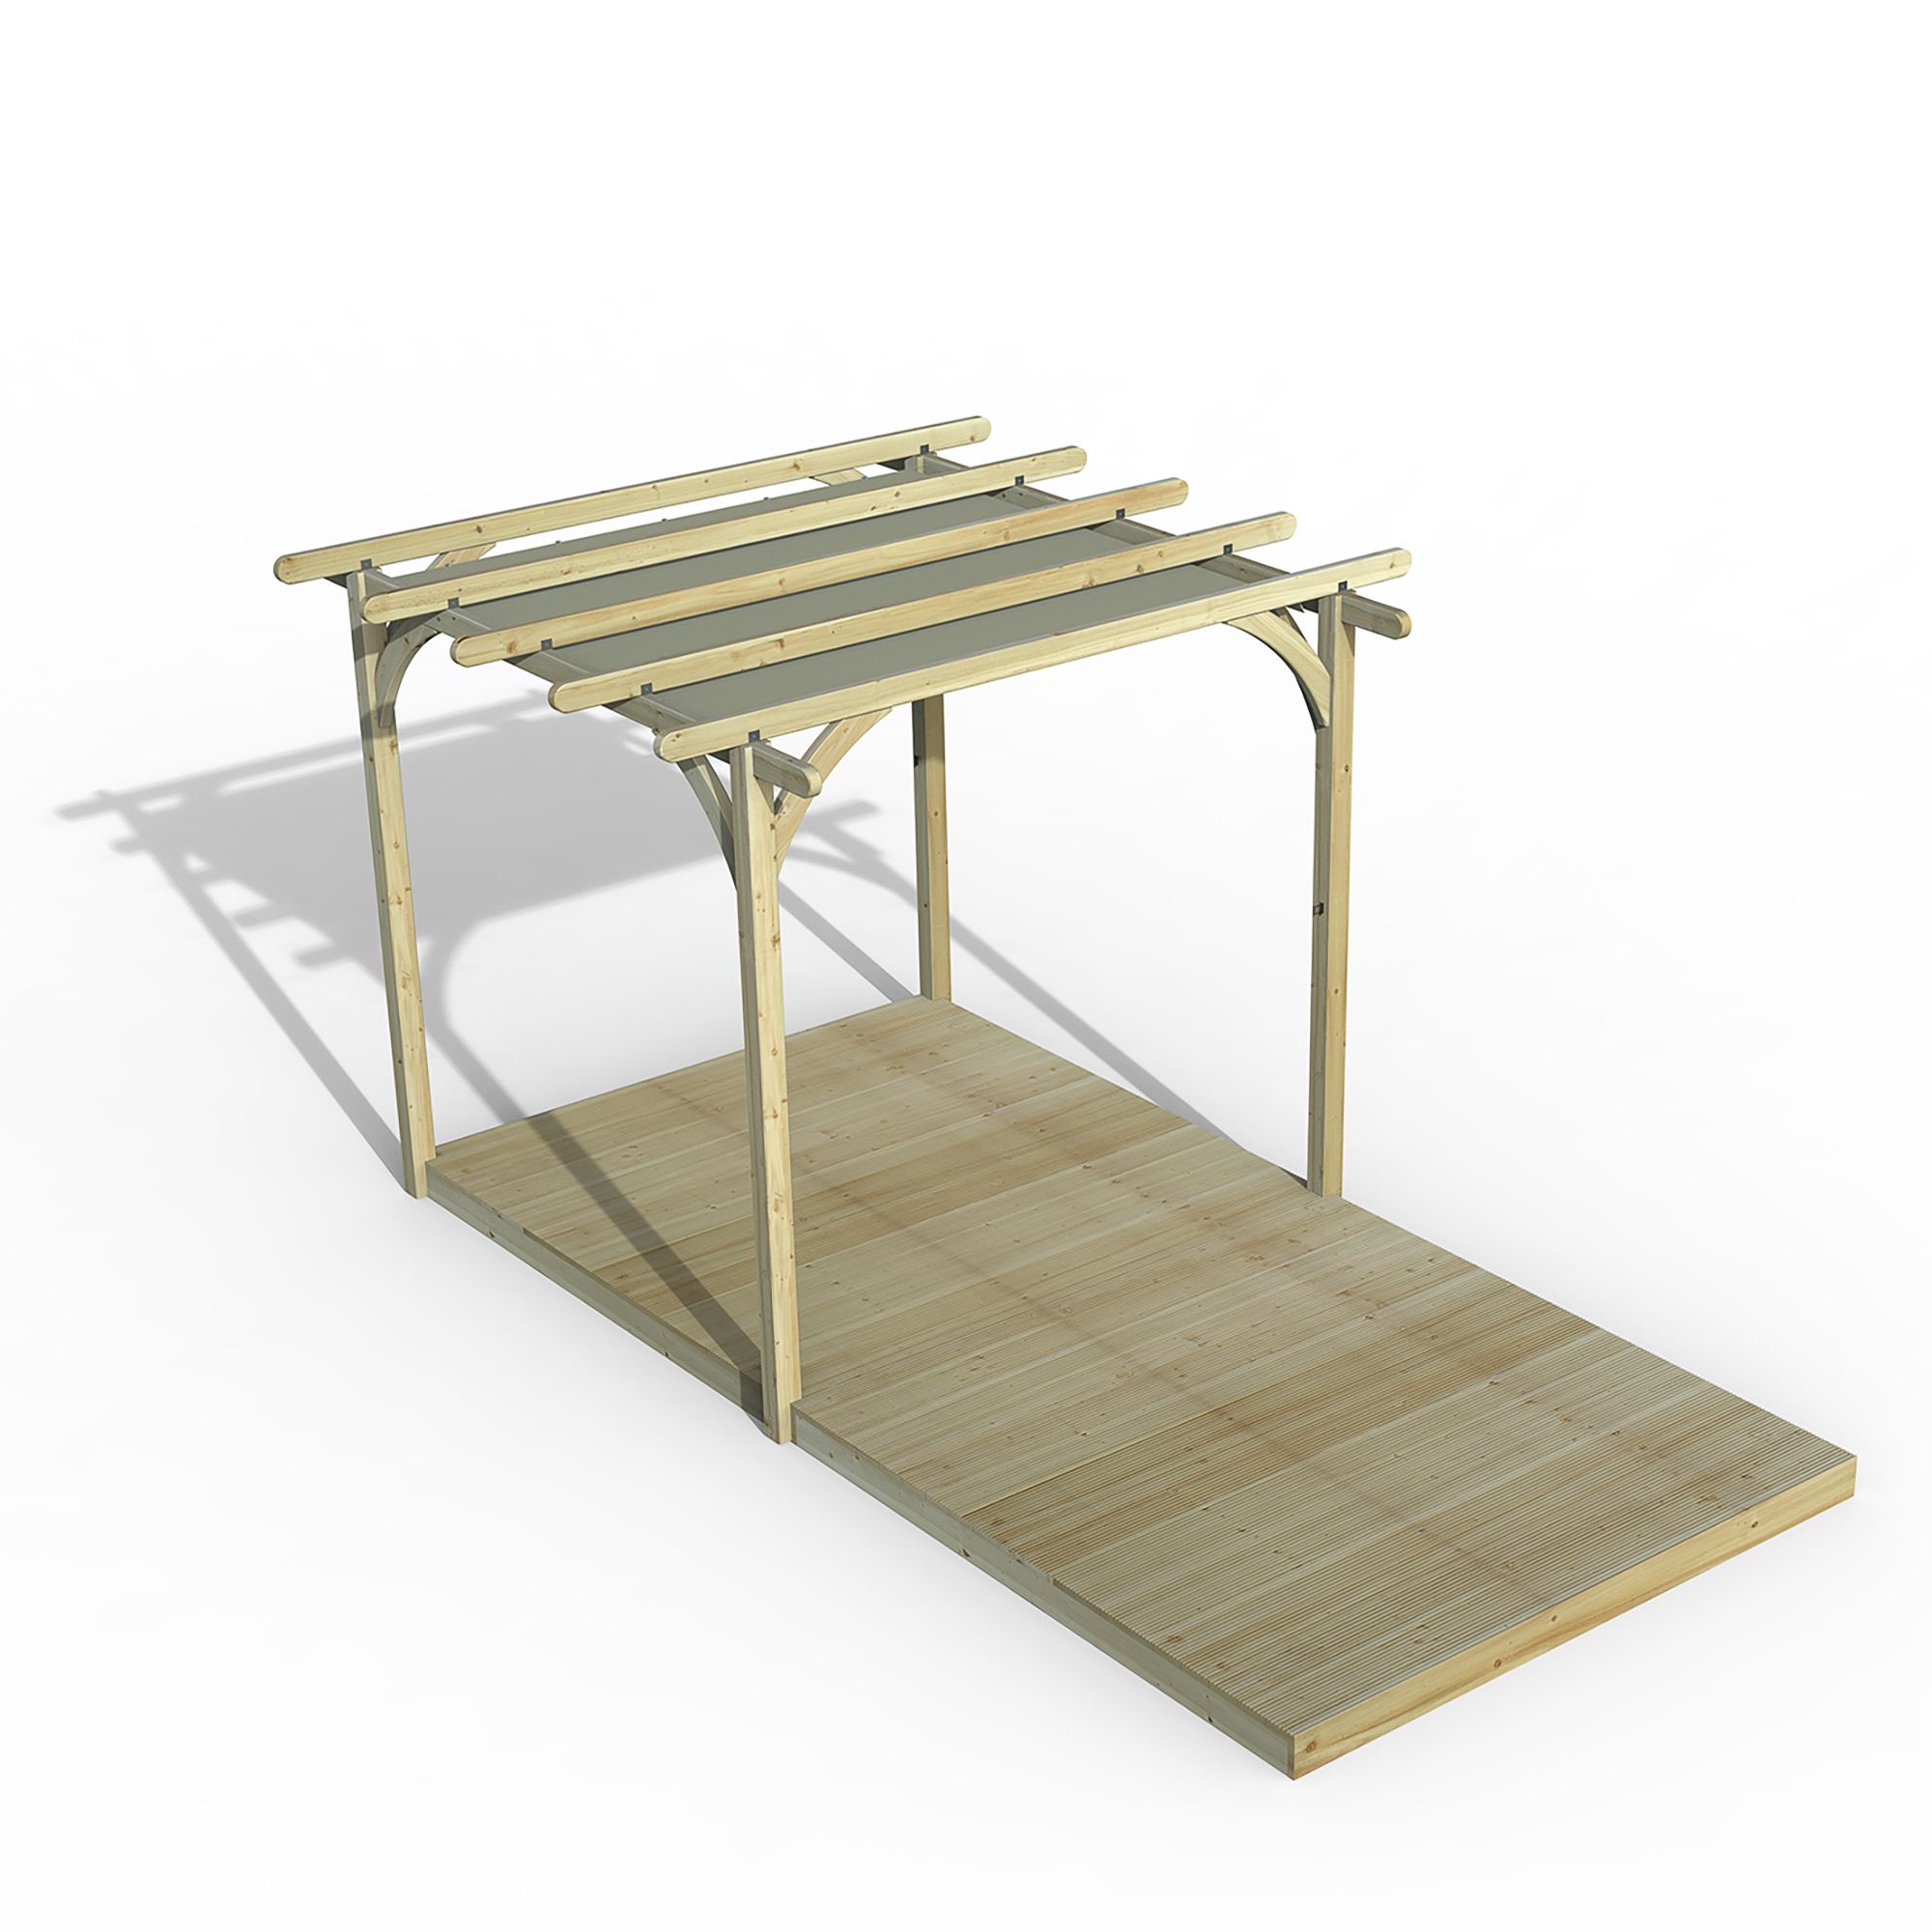 Forest Garden Grey Pergola & Decking Kit, X4 Post (H) 2.5M X (W) 5.2M - Canopy Included